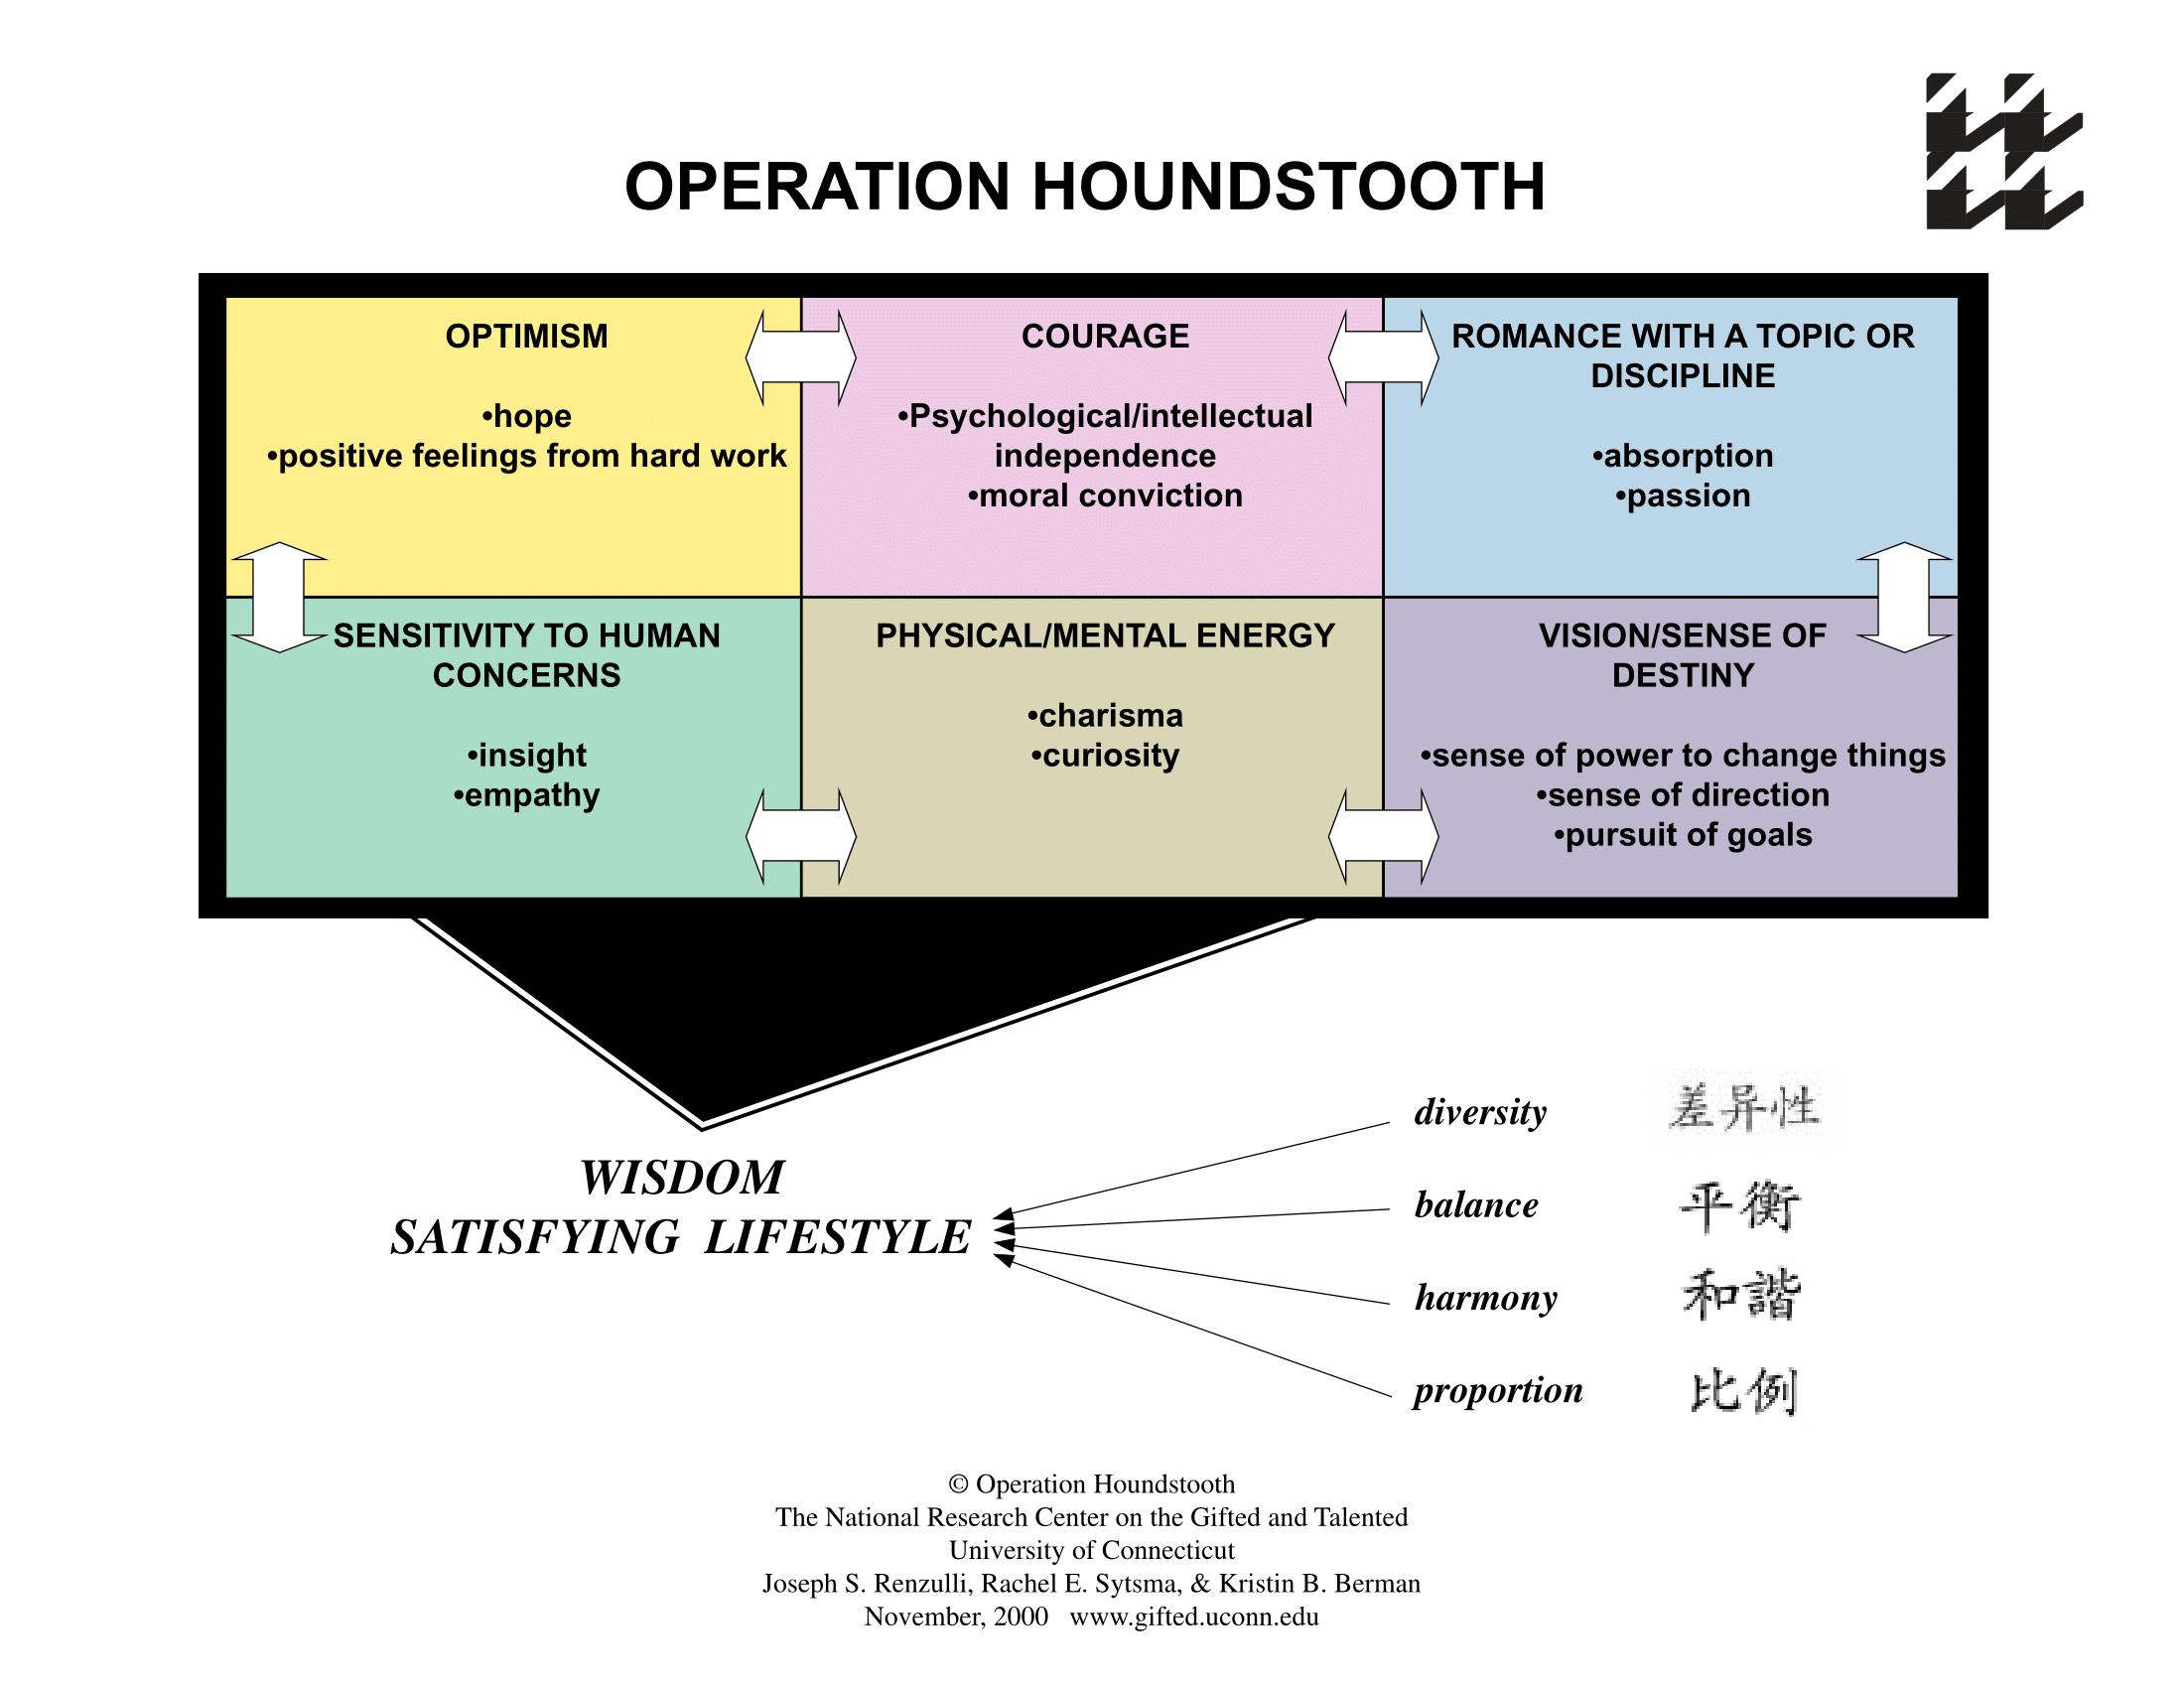 Diagram of the 6 factors in Operation Houndstooth, linking them to Wisdom and a Satisfying Lifestyle